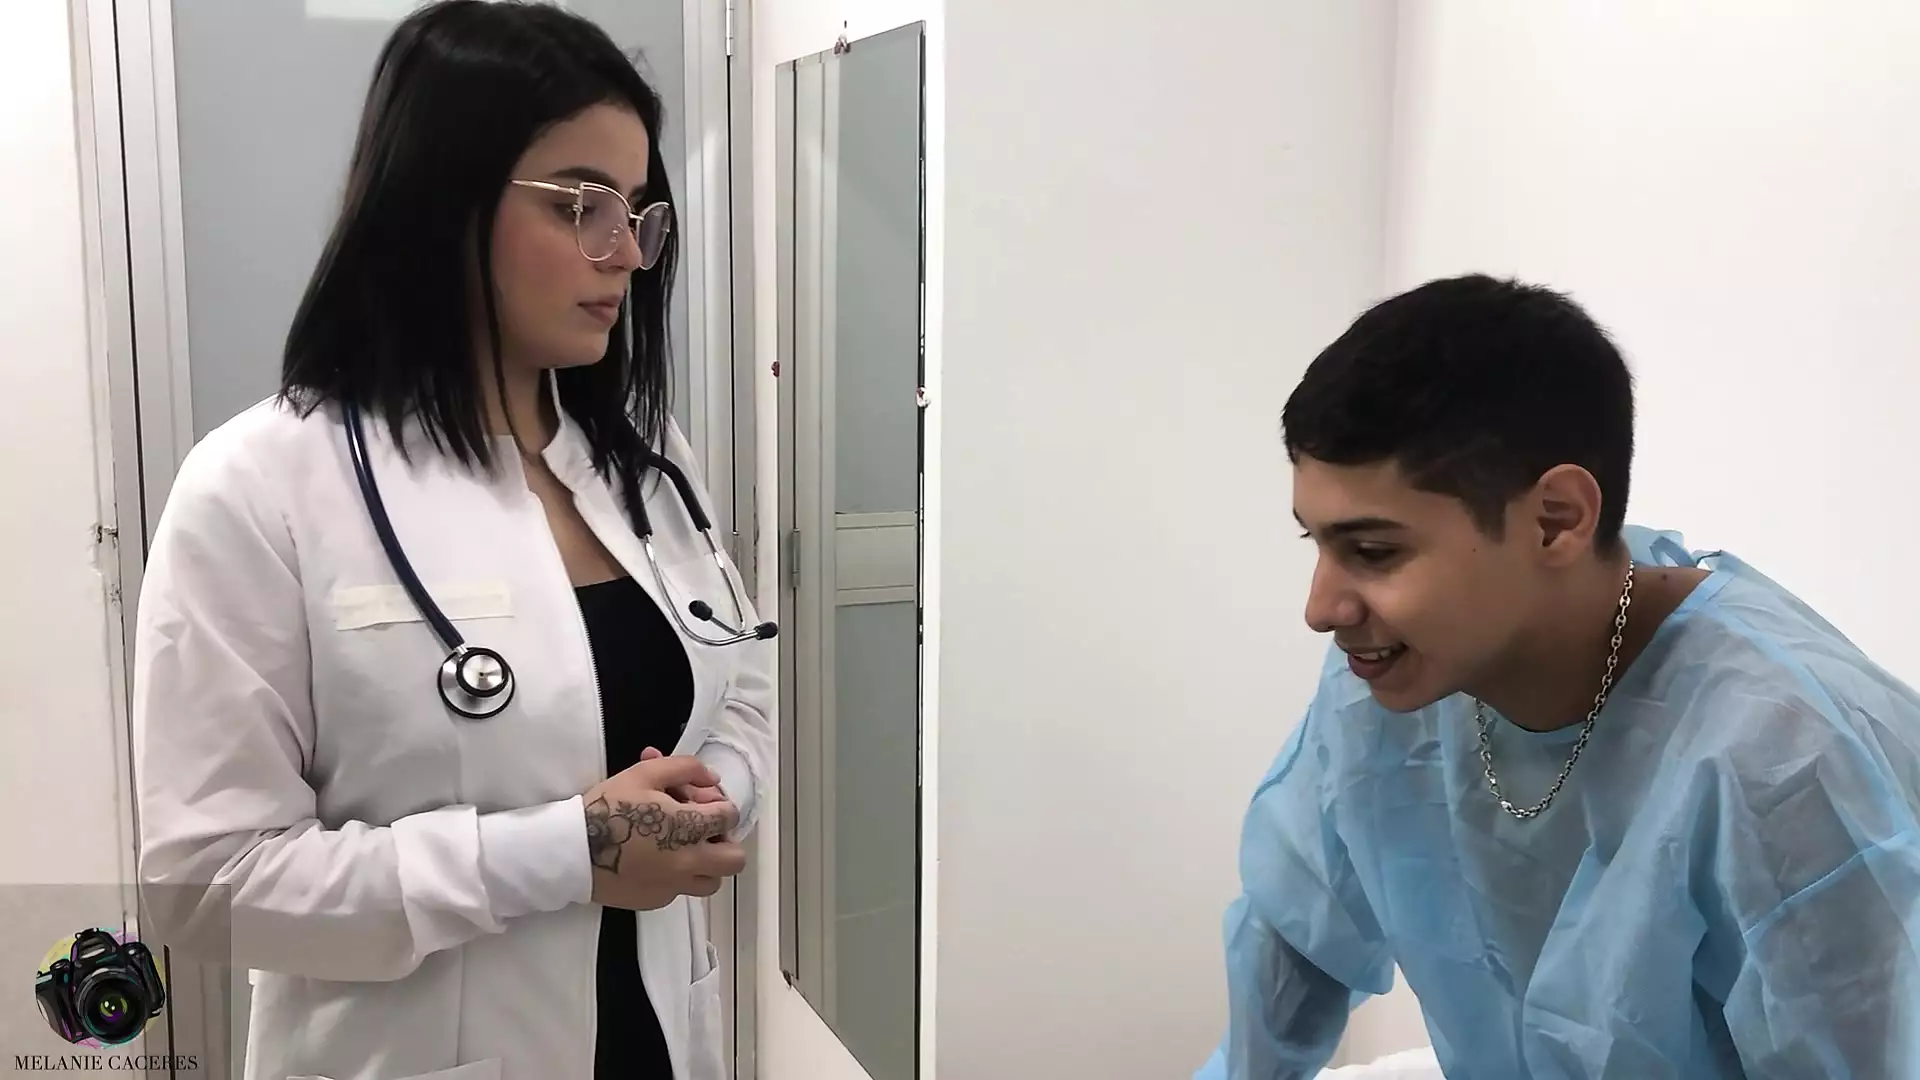 Doctor Help Me With My Erection Problem